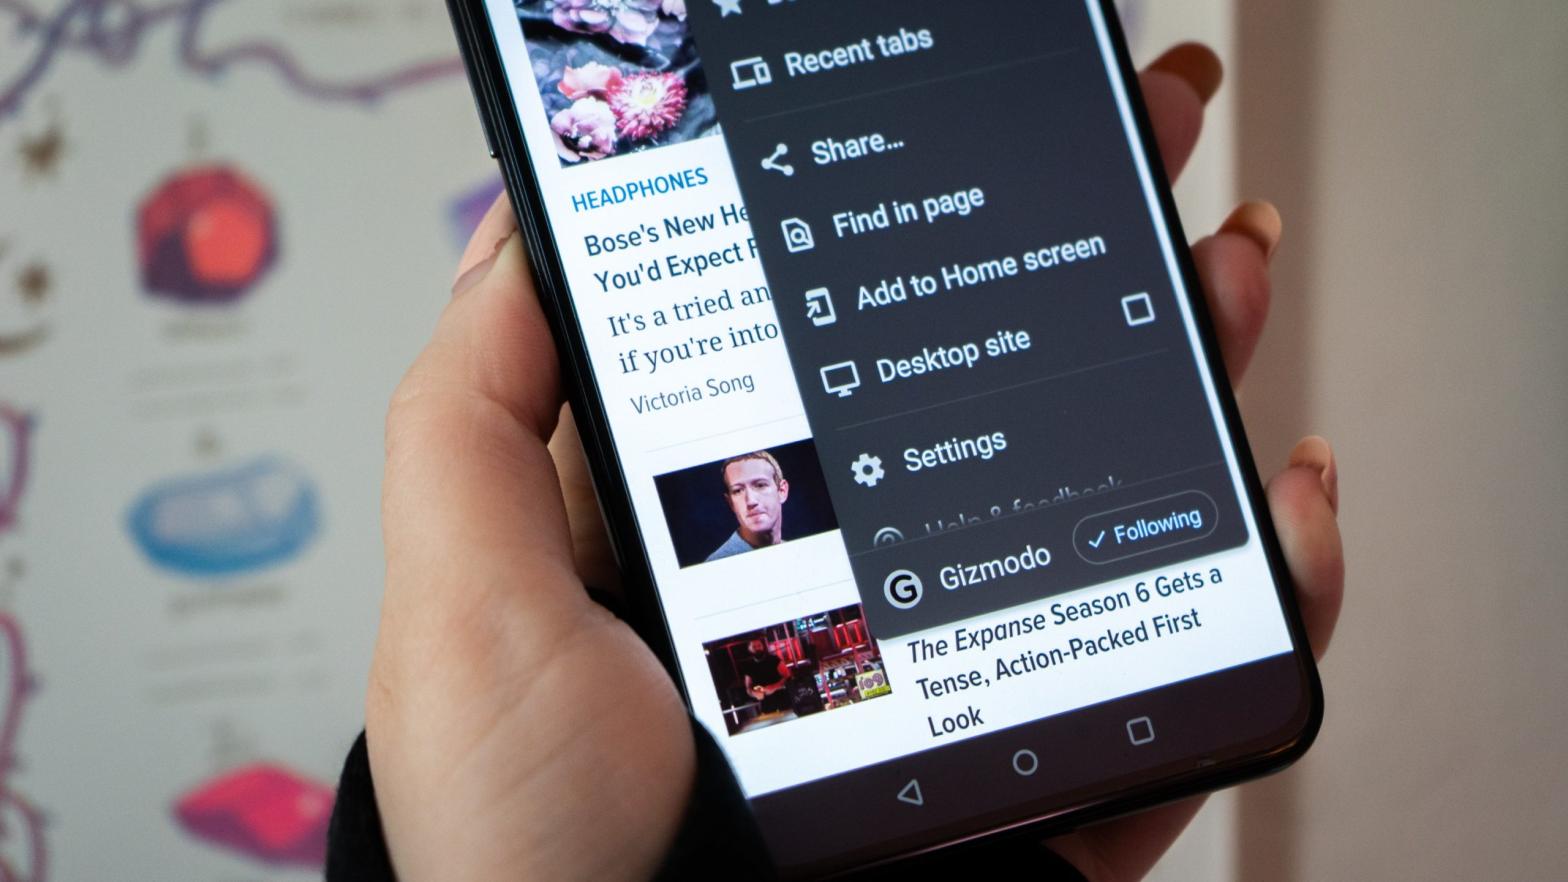 Be a faithful reader and follow Gizmodo in Chrome for Android. (Photo: Florence Ion / Gizmodo)